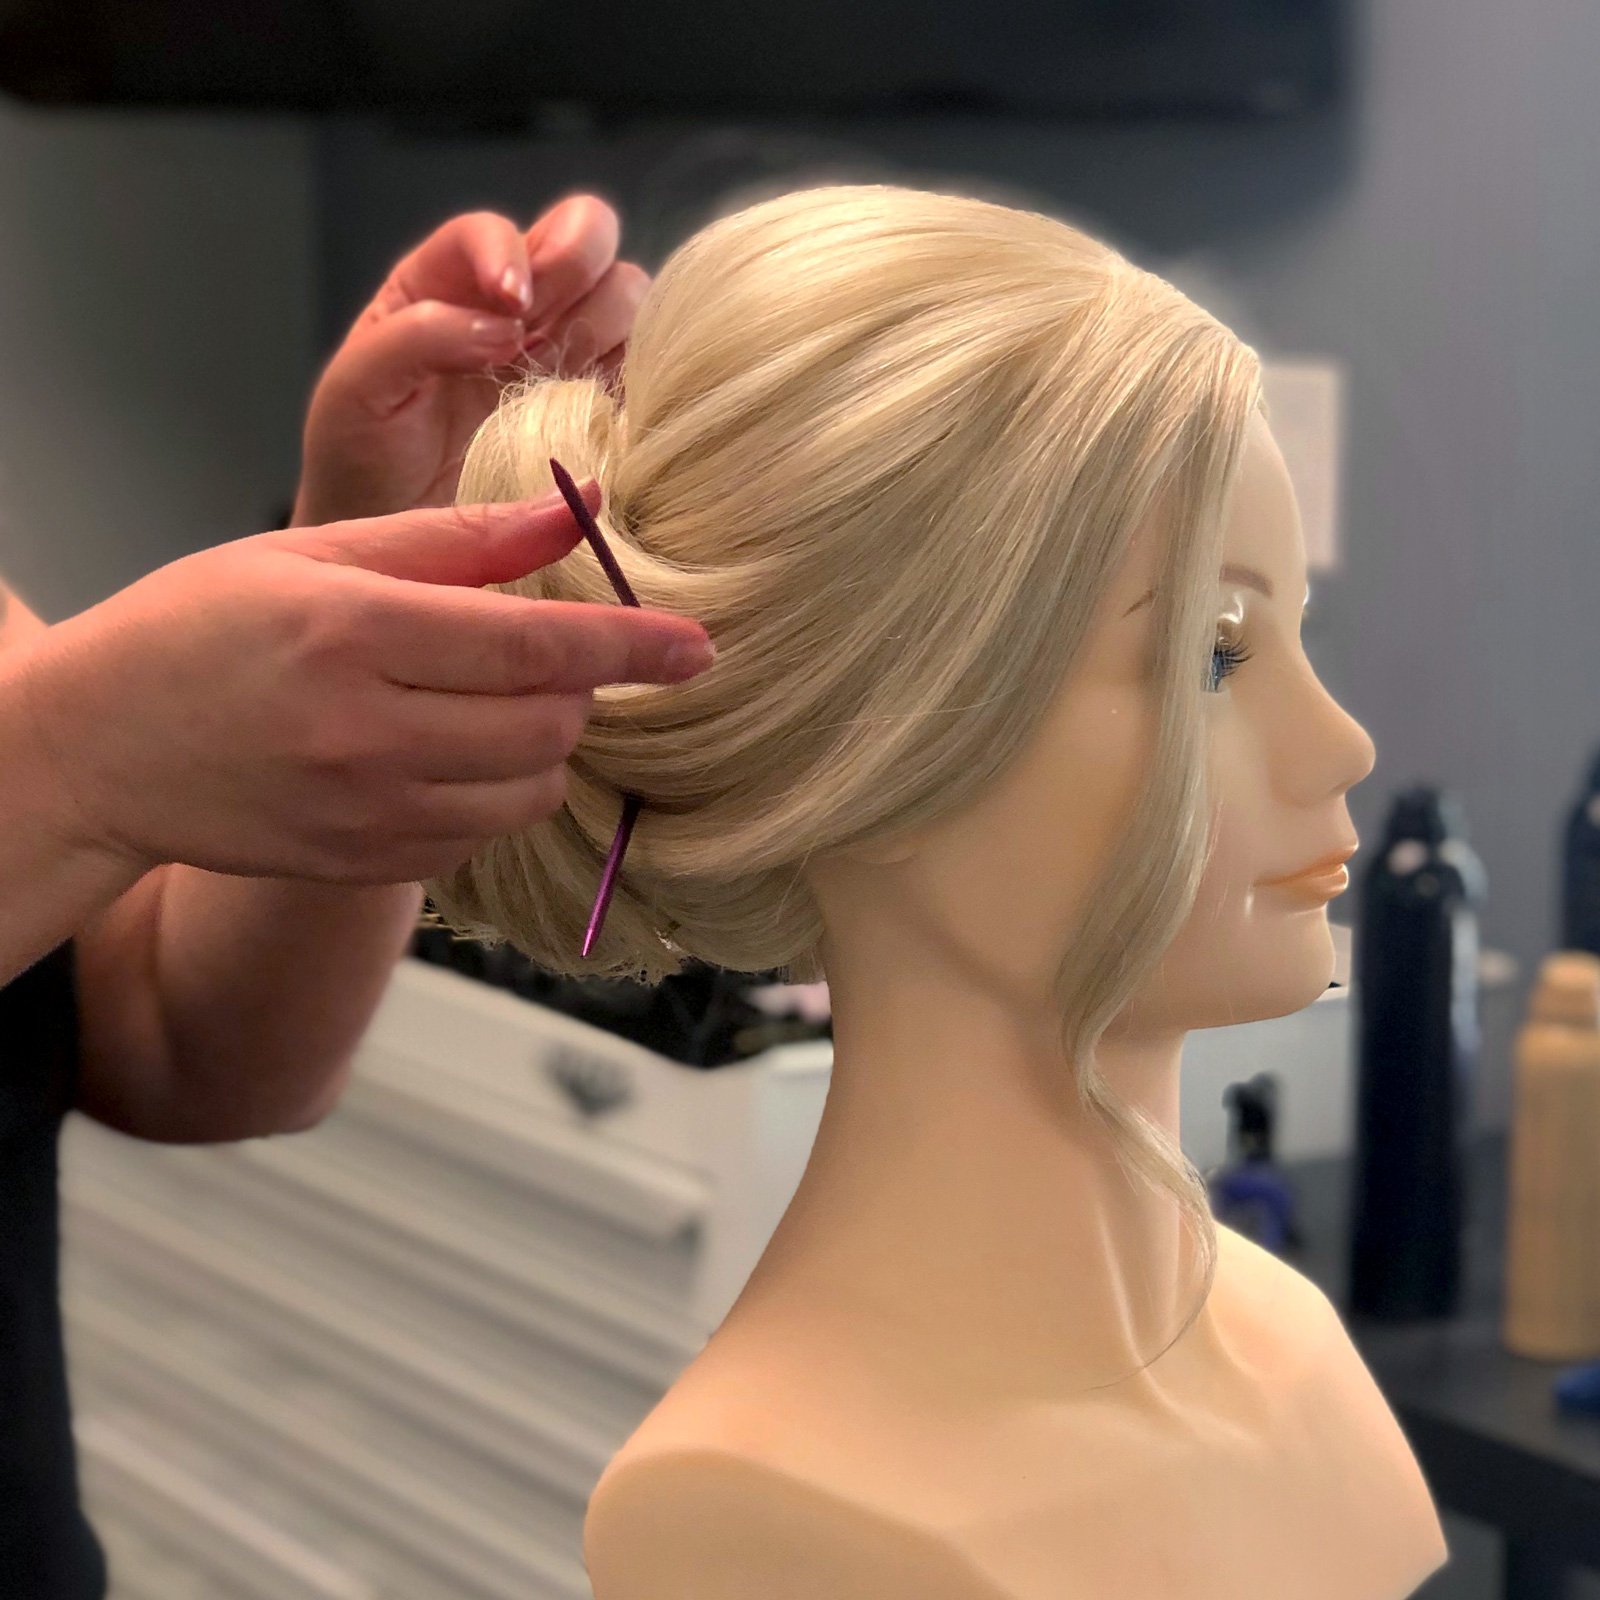 Hairstyling 101 for Makeup Artists — Make Up First®